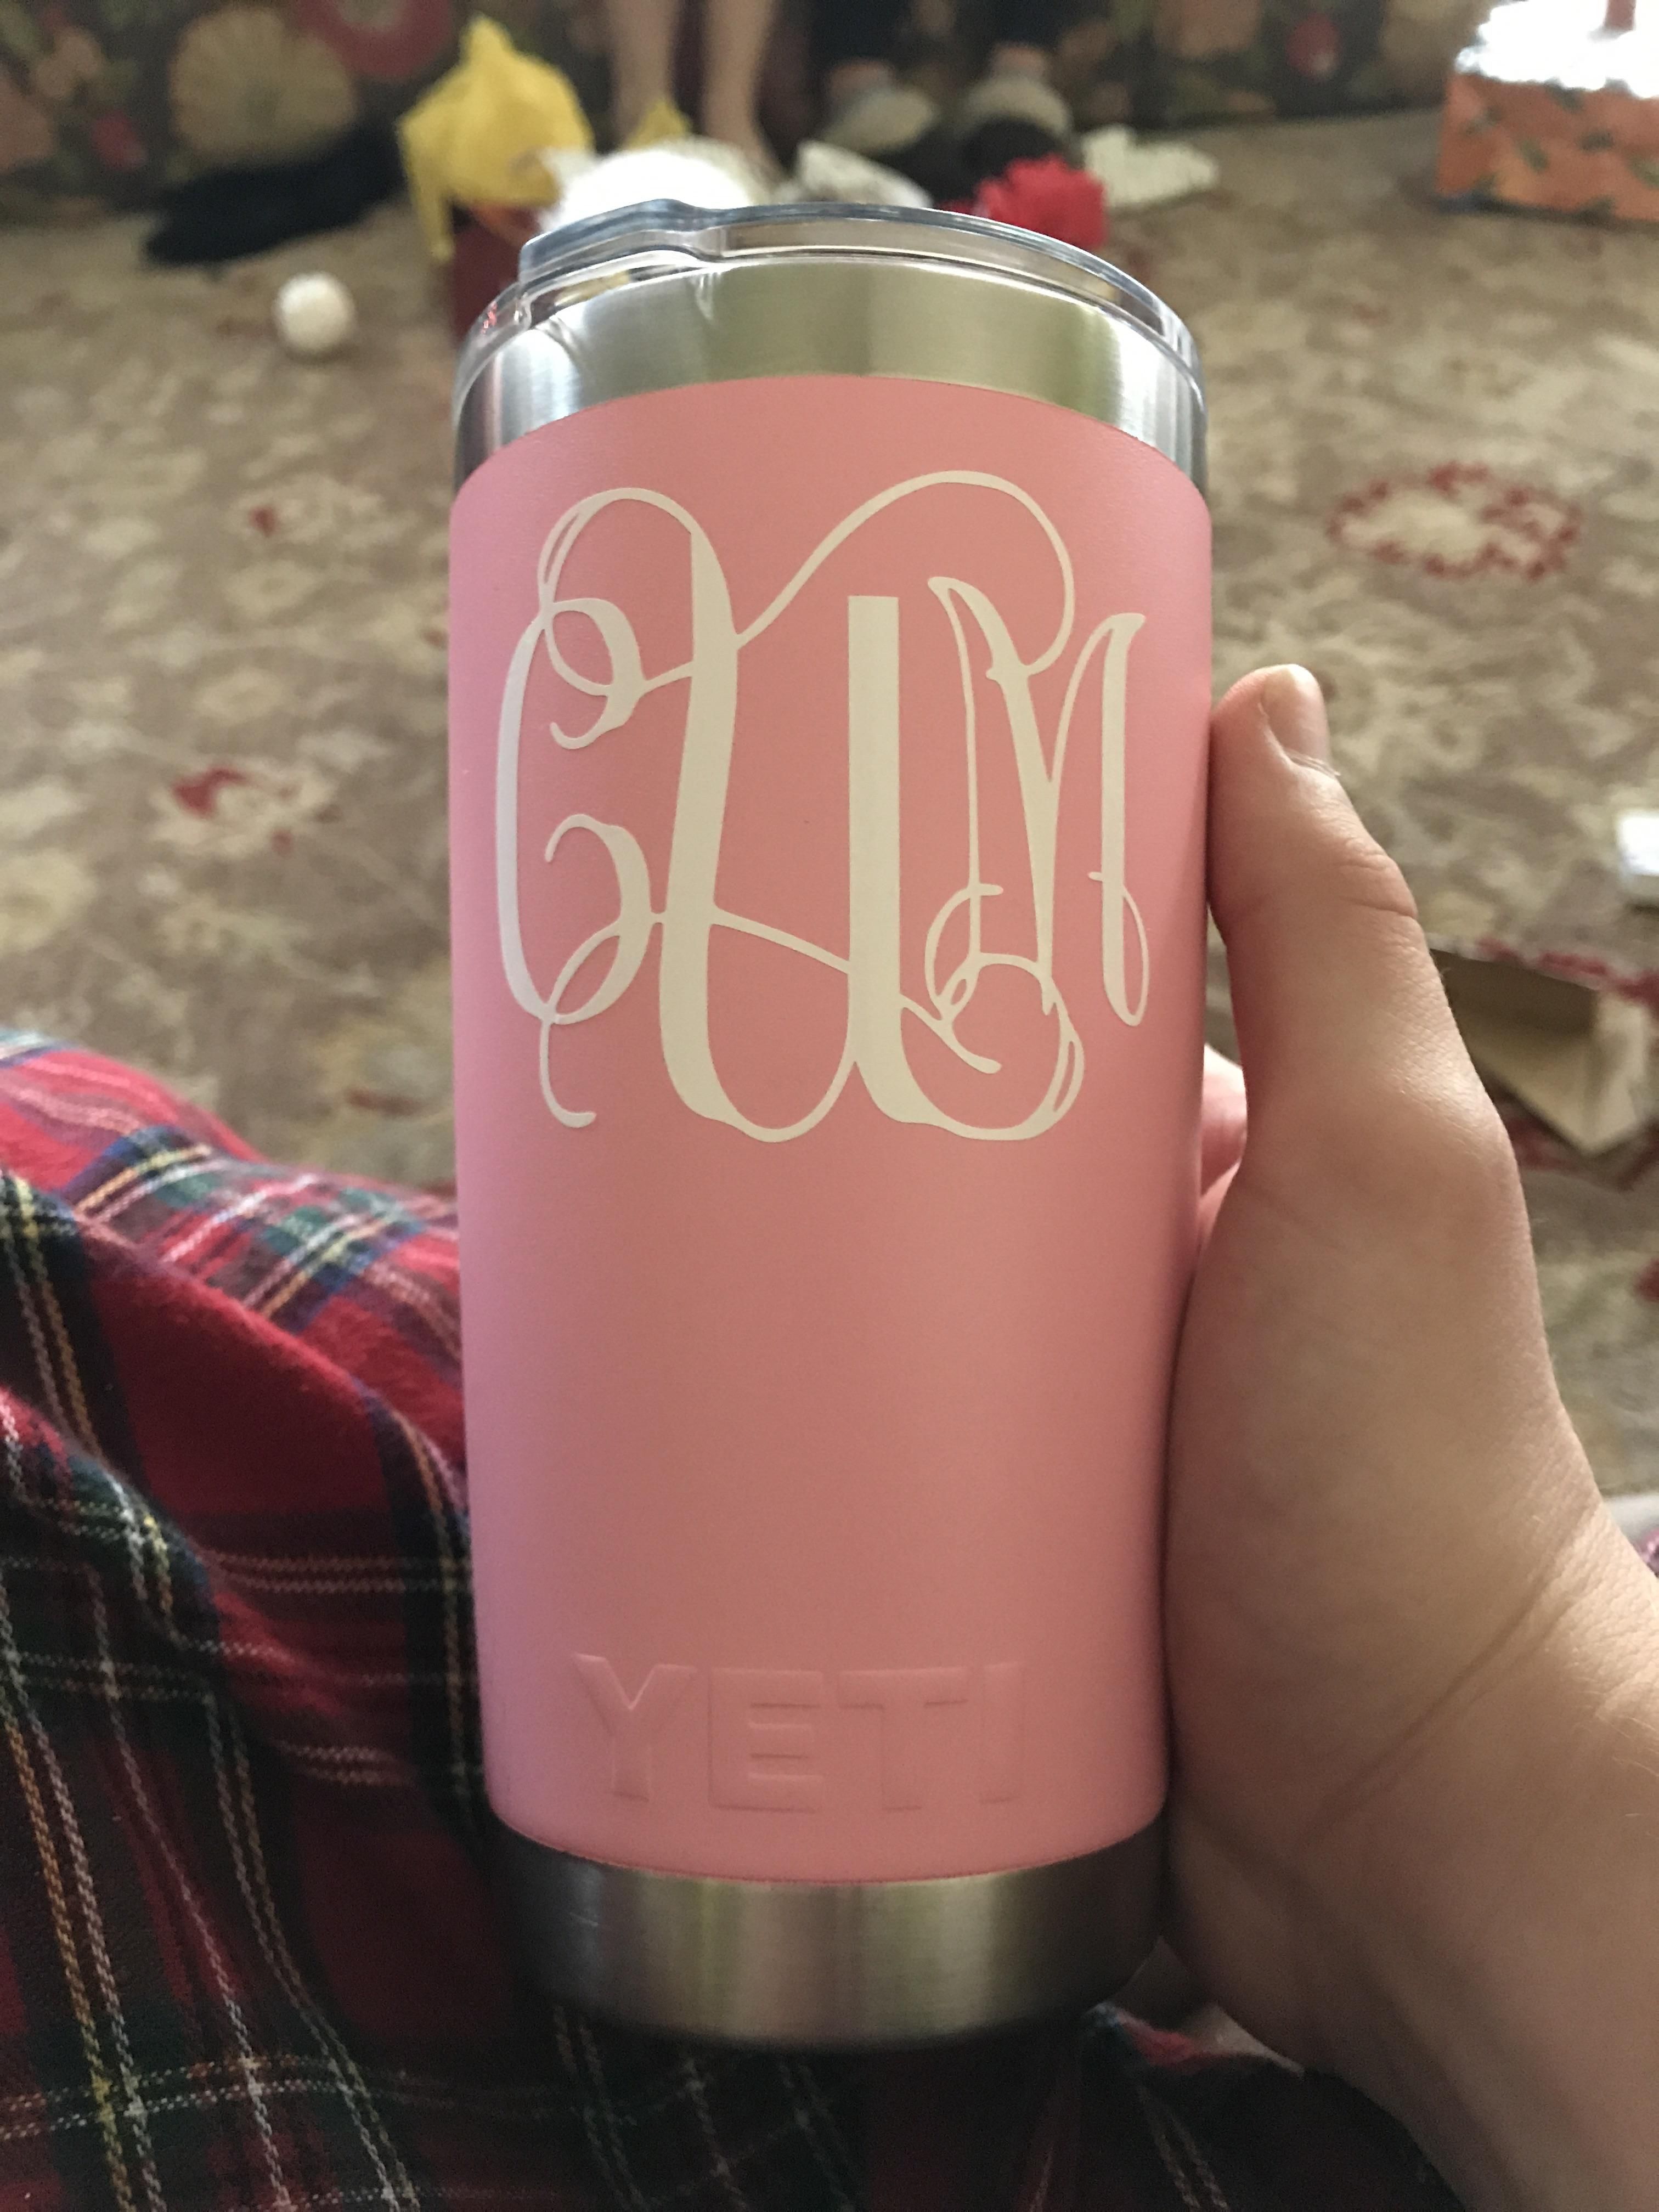 My sweet innocent mother got my sister a thermos with her initials monogramed on it for Christmas.